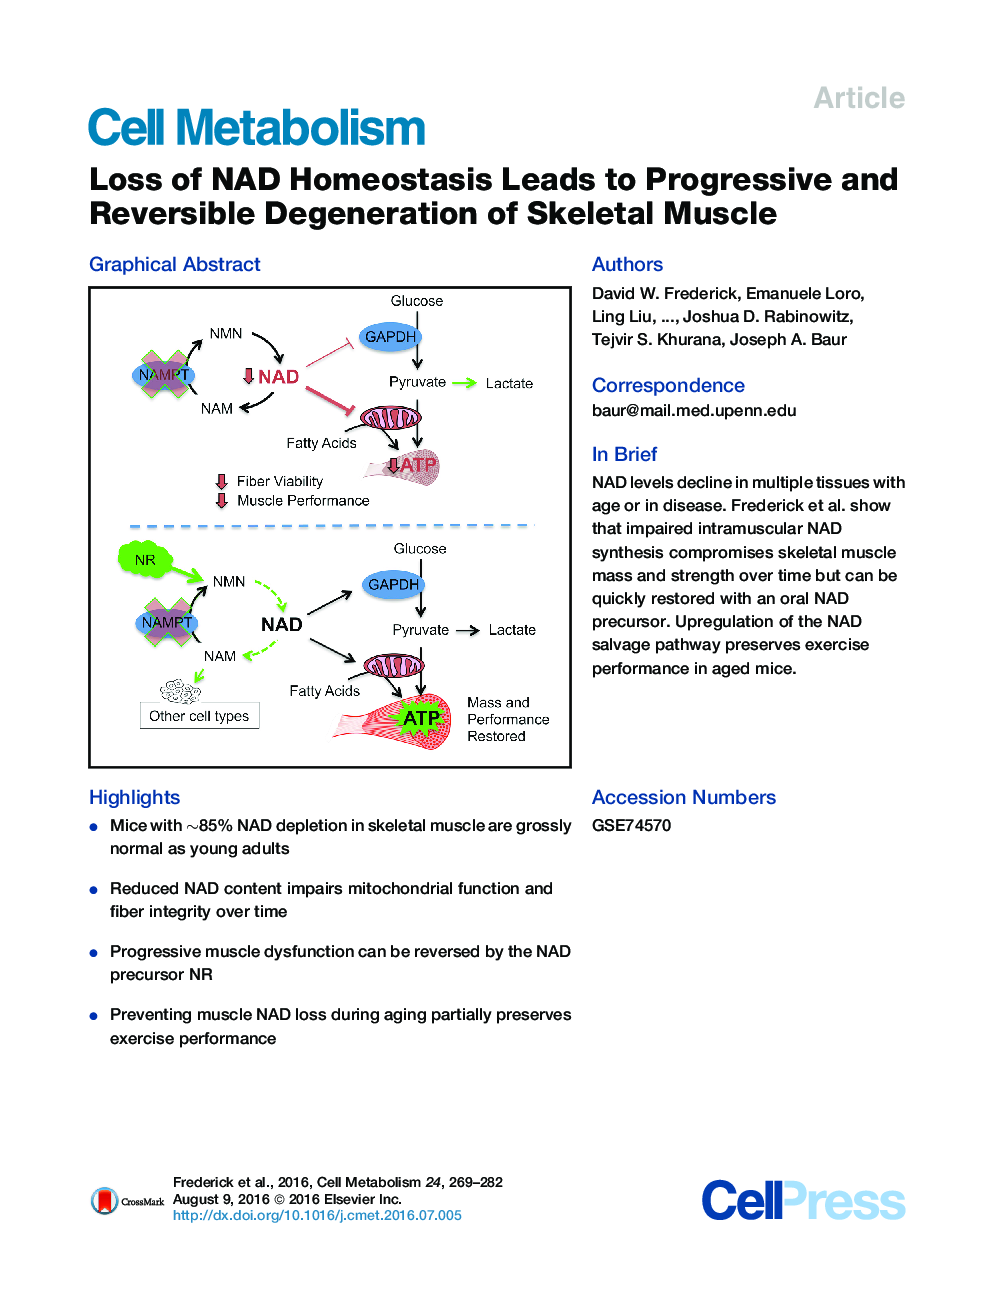 Loss of NAD Homeostasis Leads to Progressive and Reversible Degeneration of Skeletal Muscle